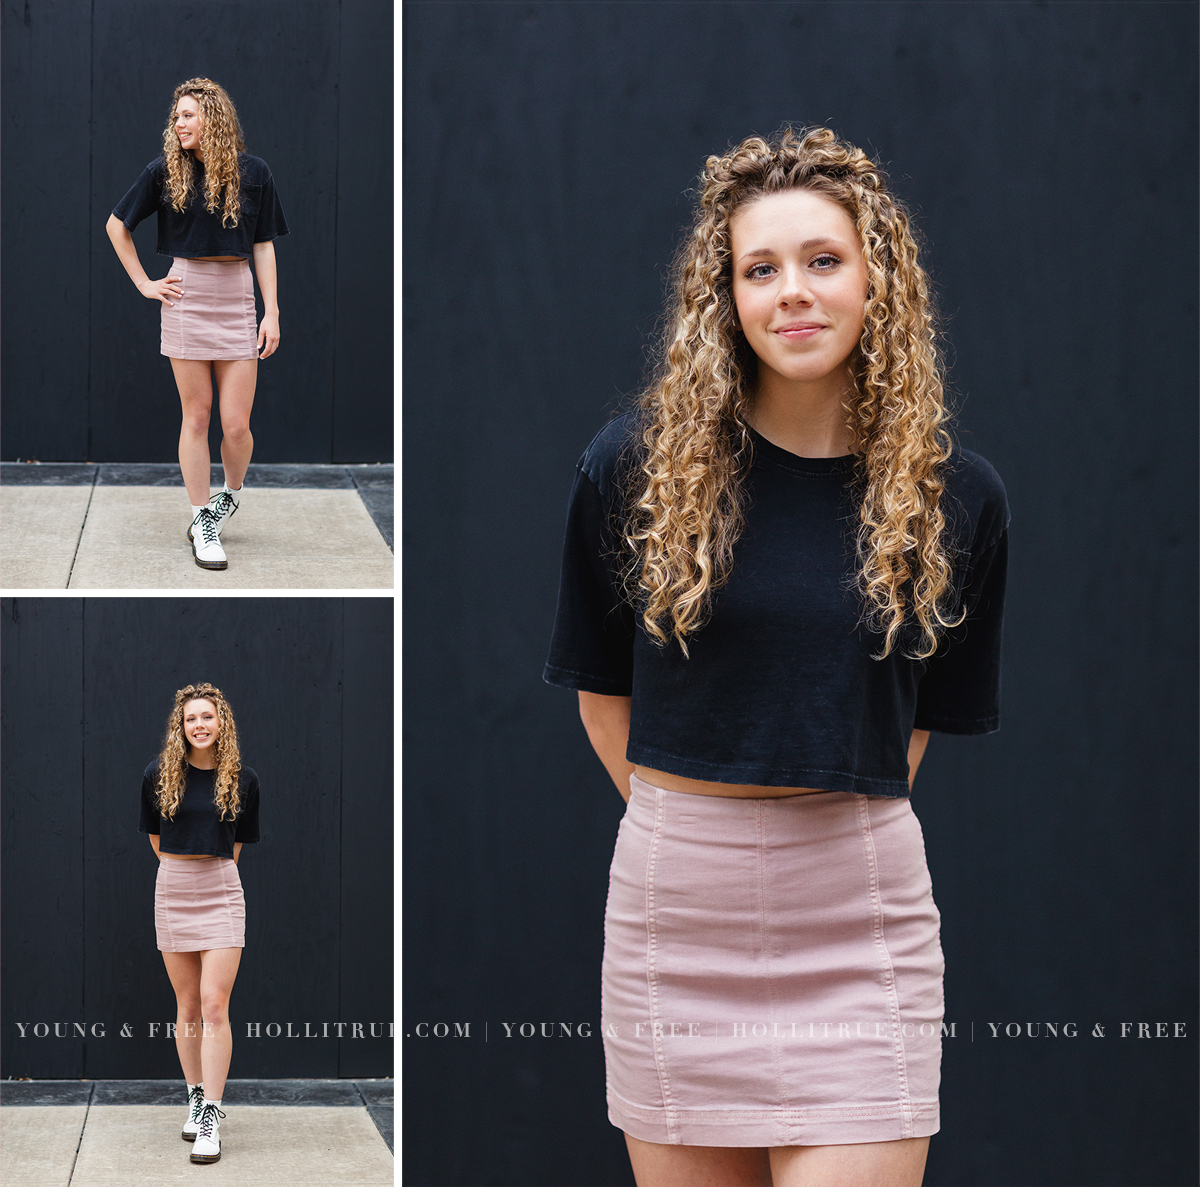 Downtown Eugene Senior Portrait Session with Sierra by Holli True Photography